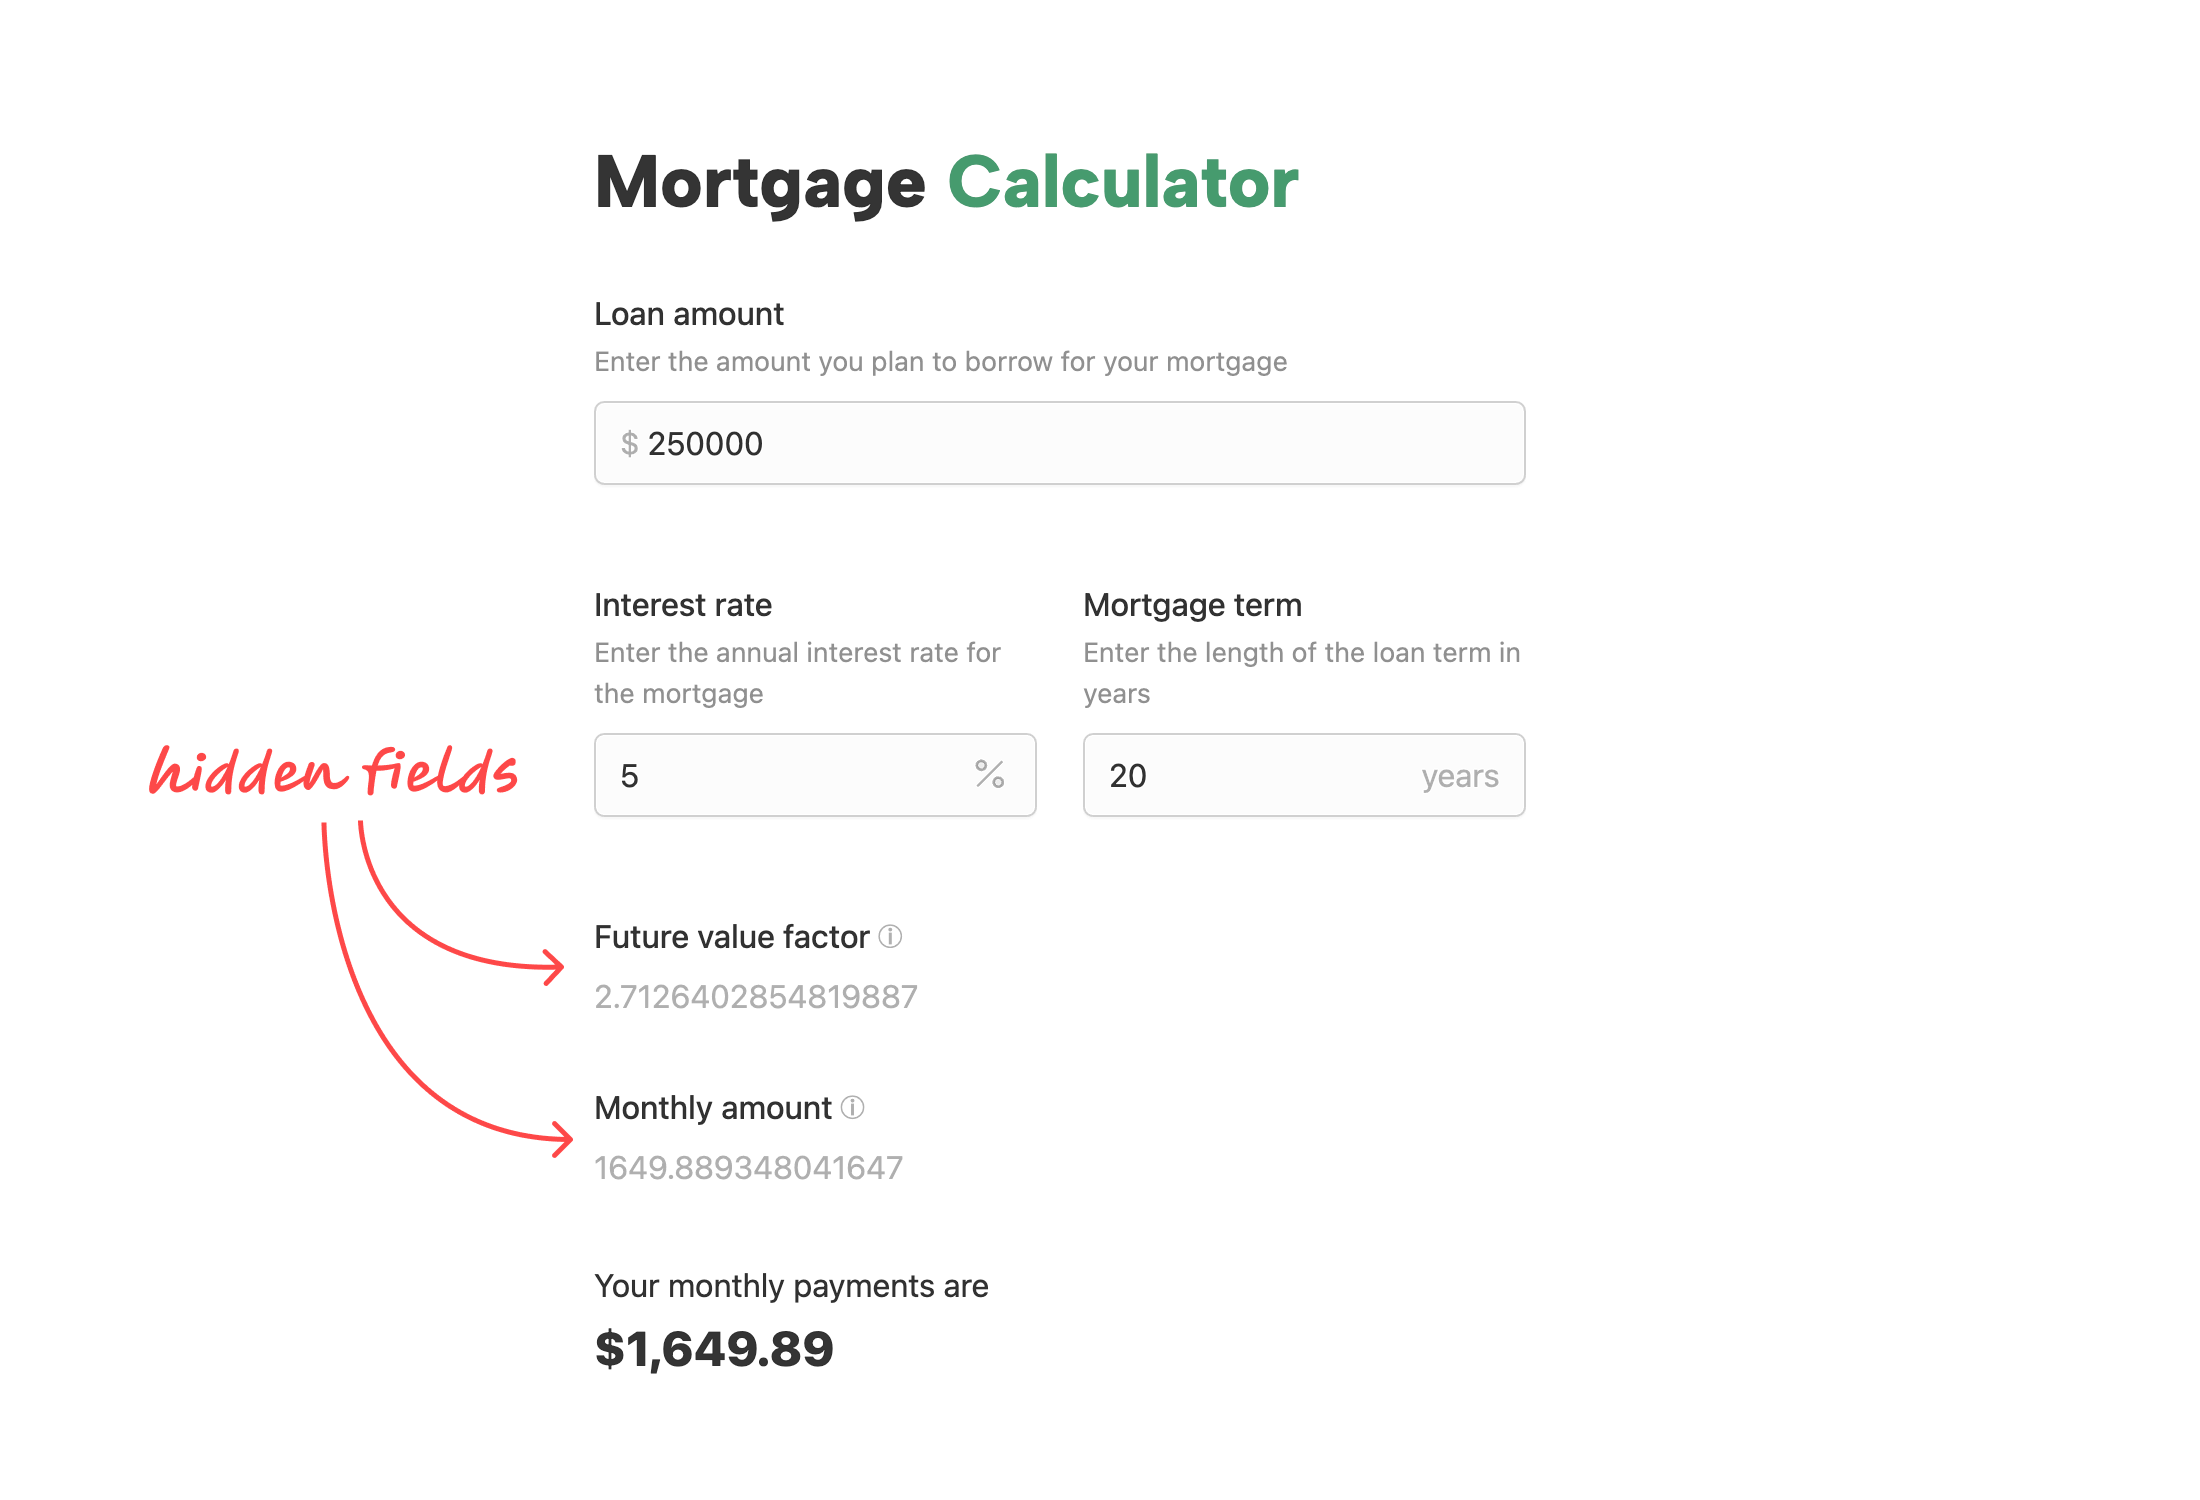 Mortgage calculator form's preview mode showing hidden fields